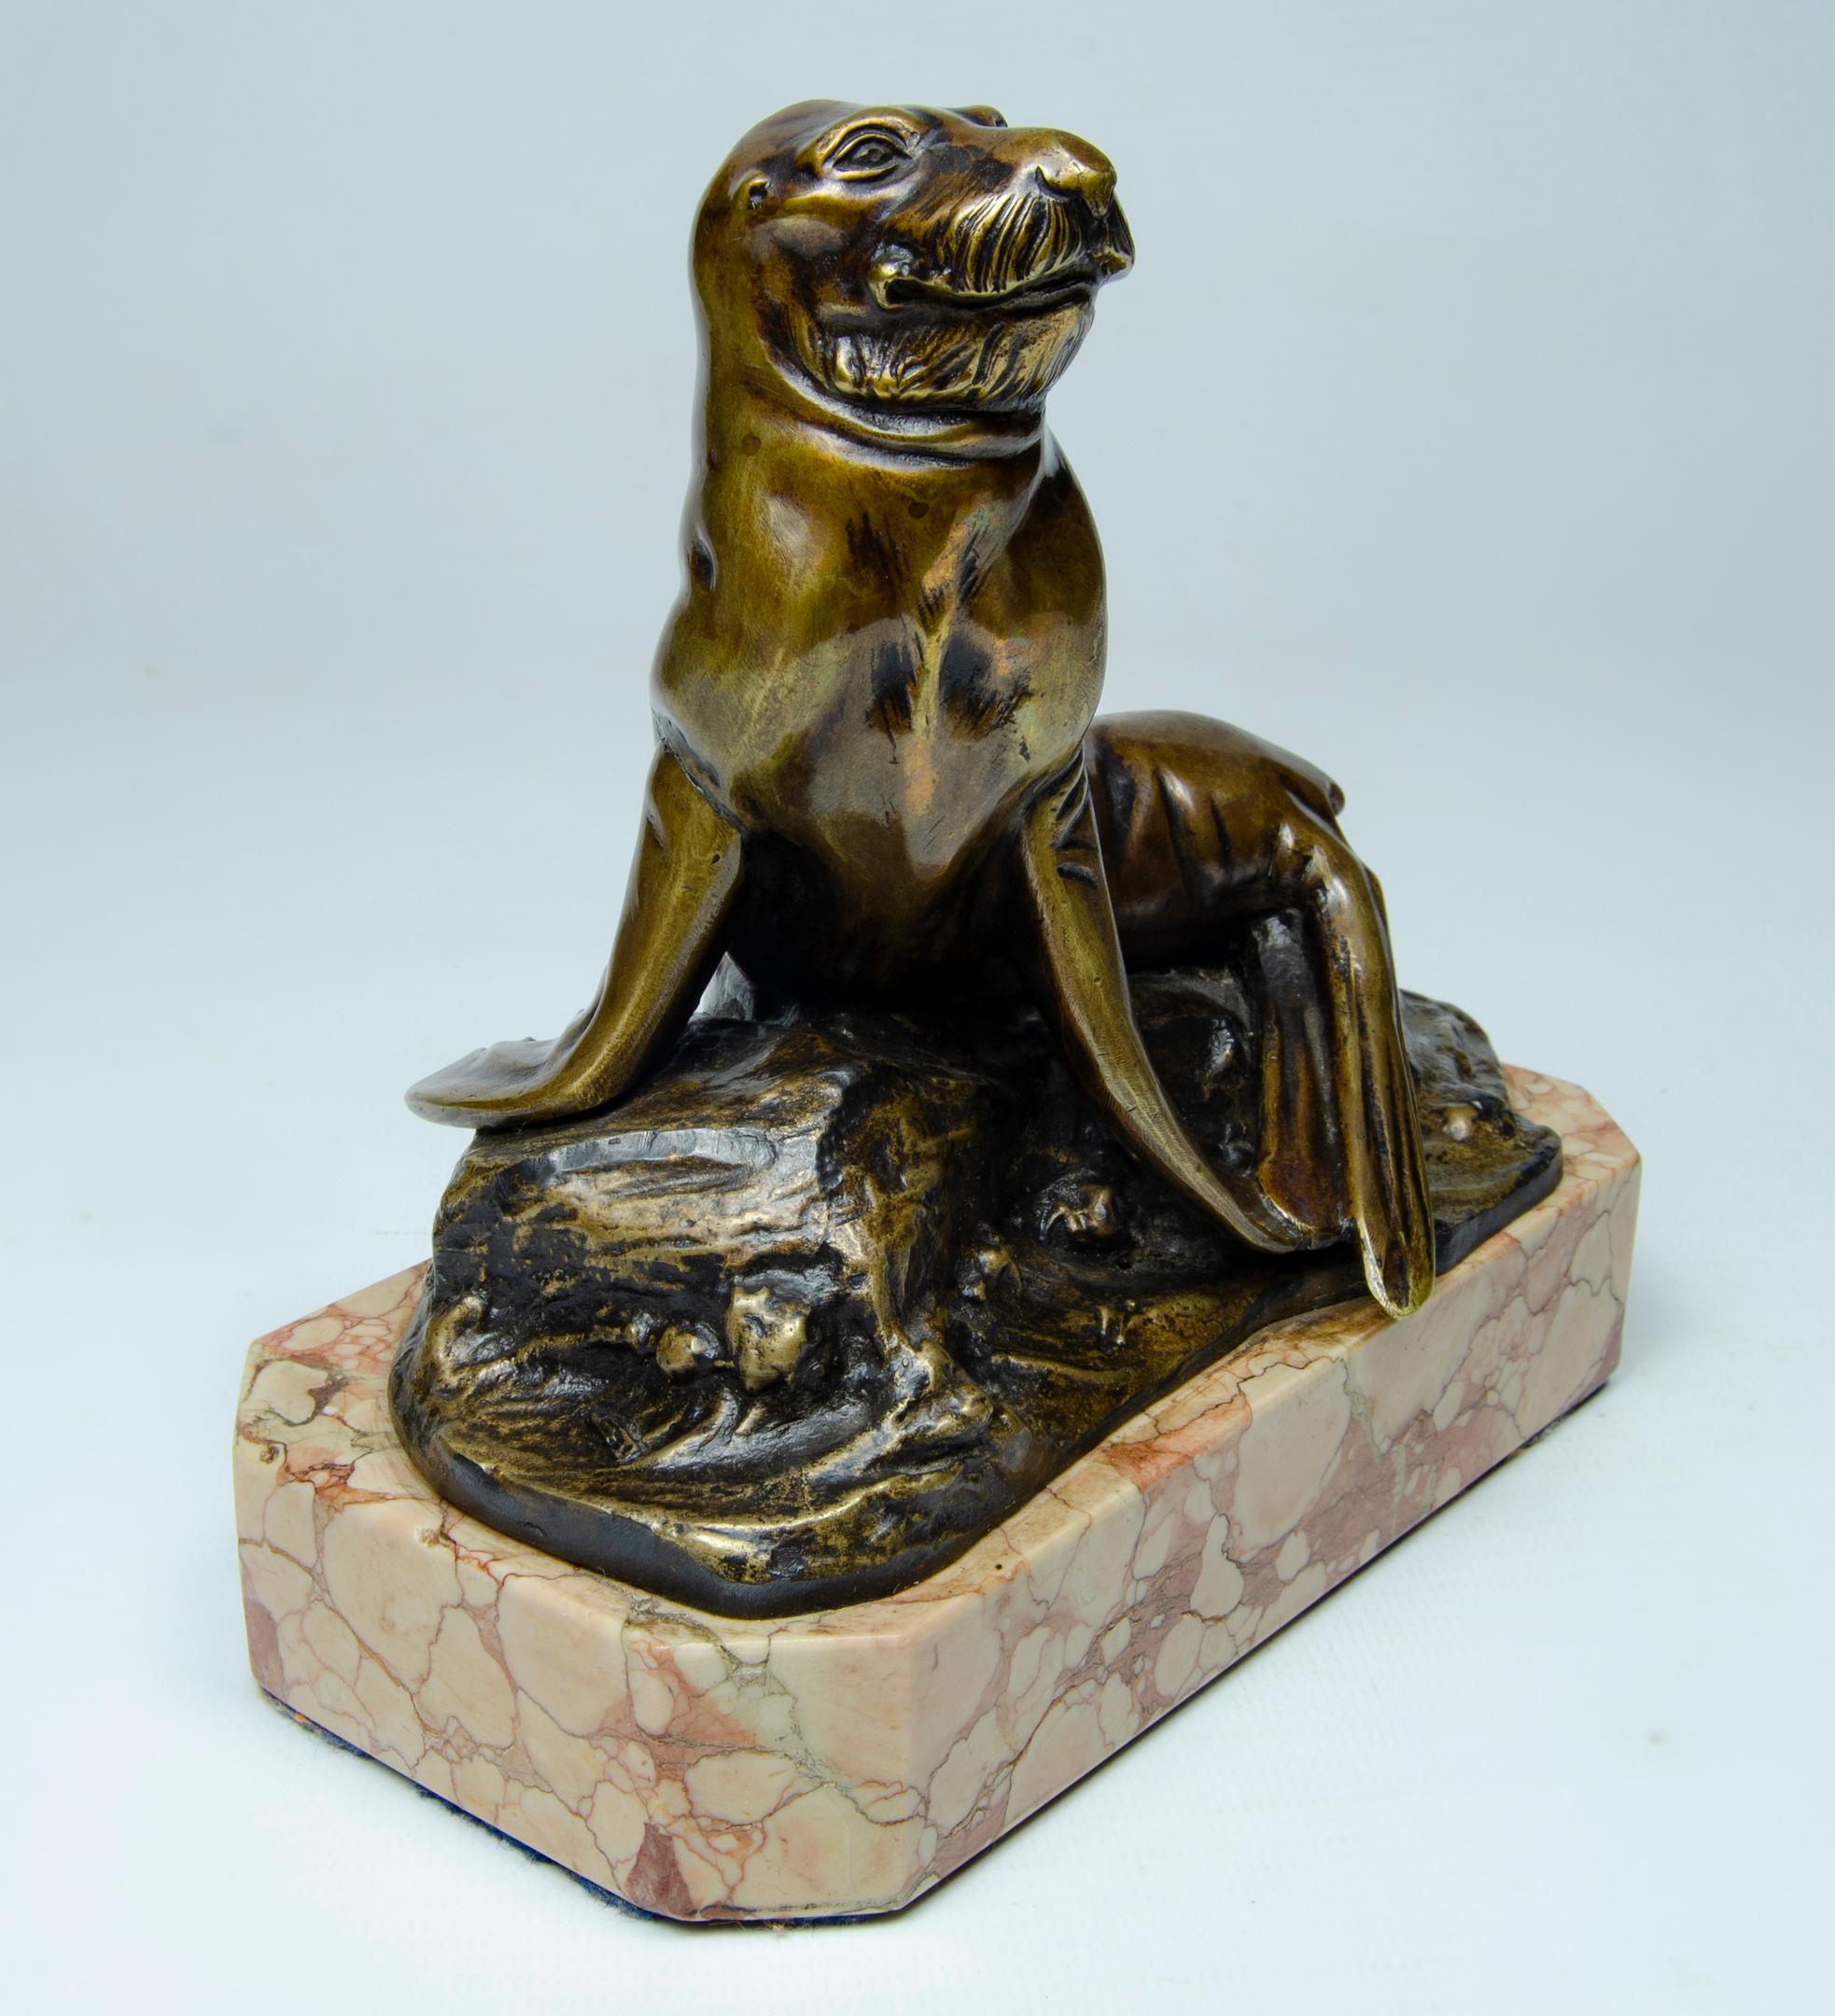 Seal sculpture in bronze,
circa 20th century
Origin France illegible signature
signed in the bronze back
perfect condition with natural wear.